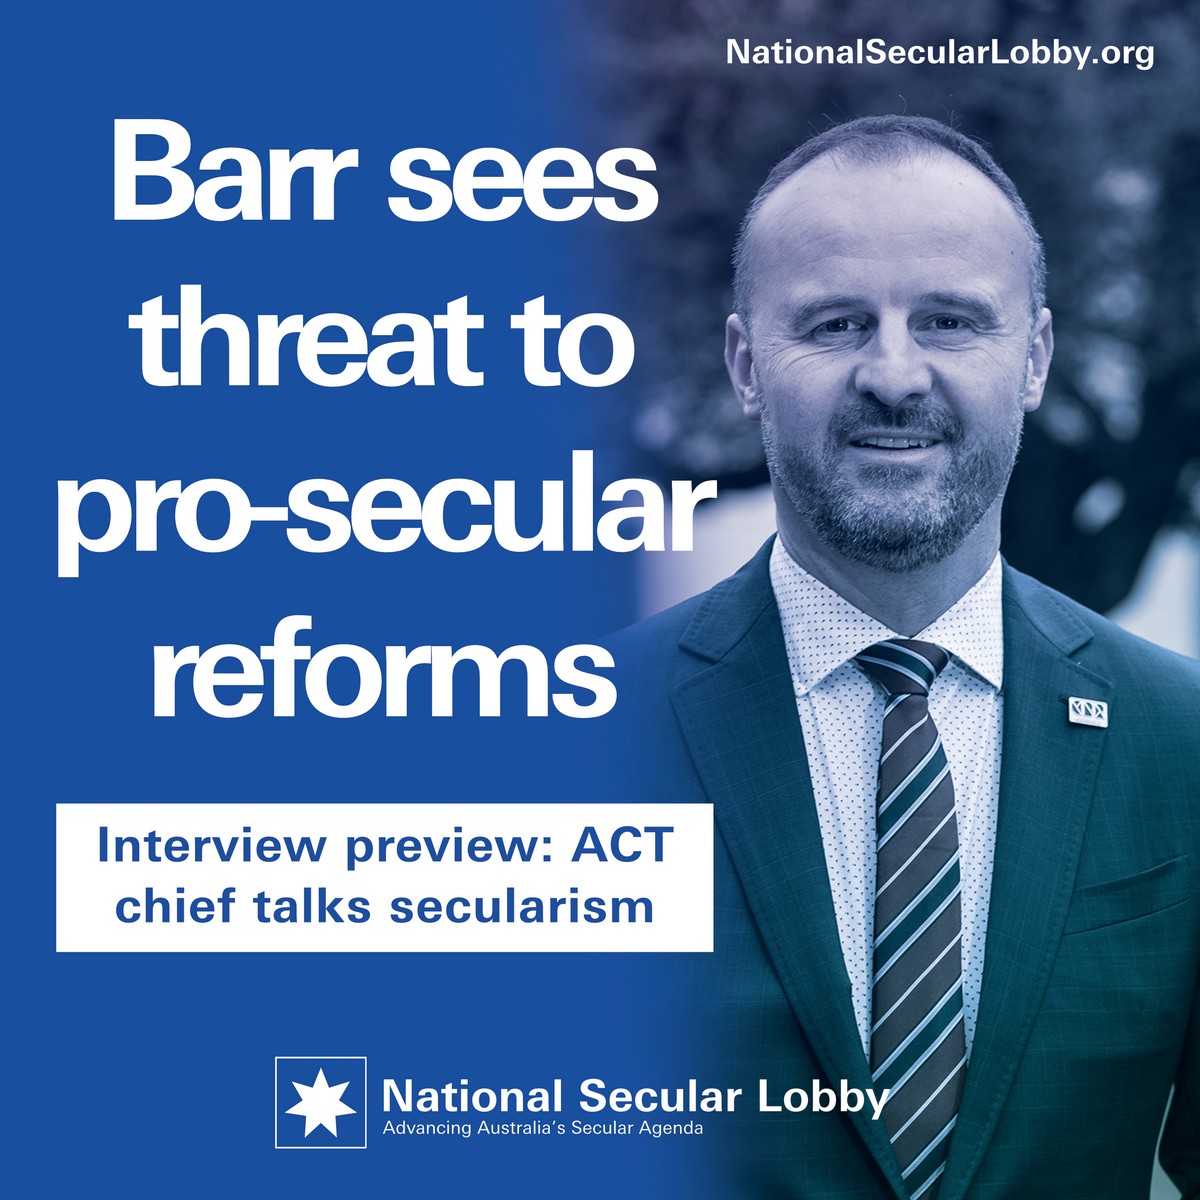 andrew-barr-secularism-interview-preview-facebook